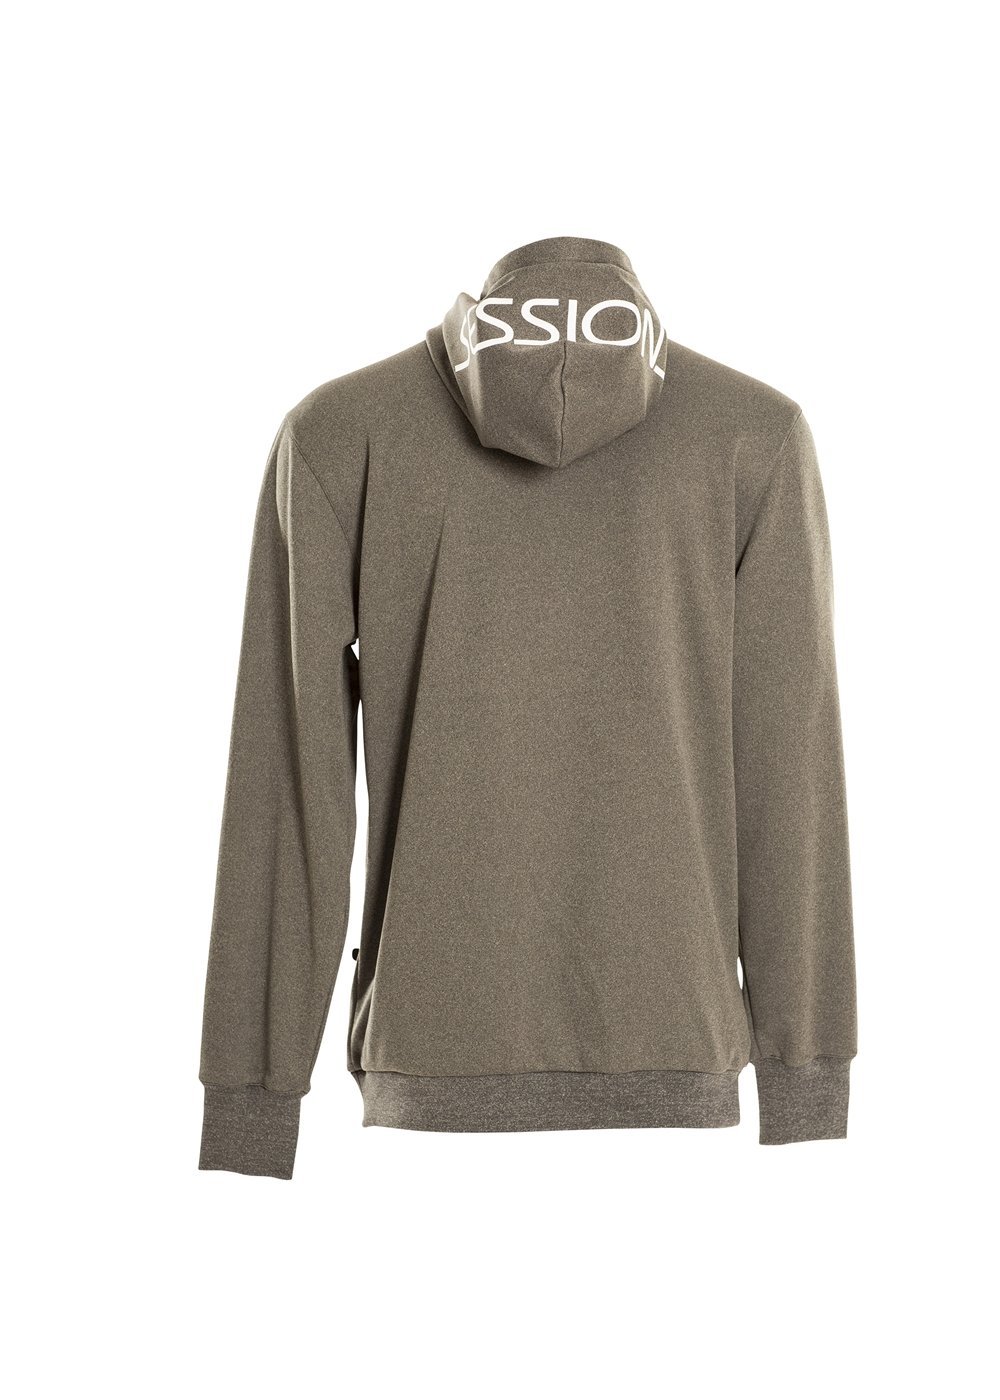 Sessions Nighthawk pullover hoodie grey